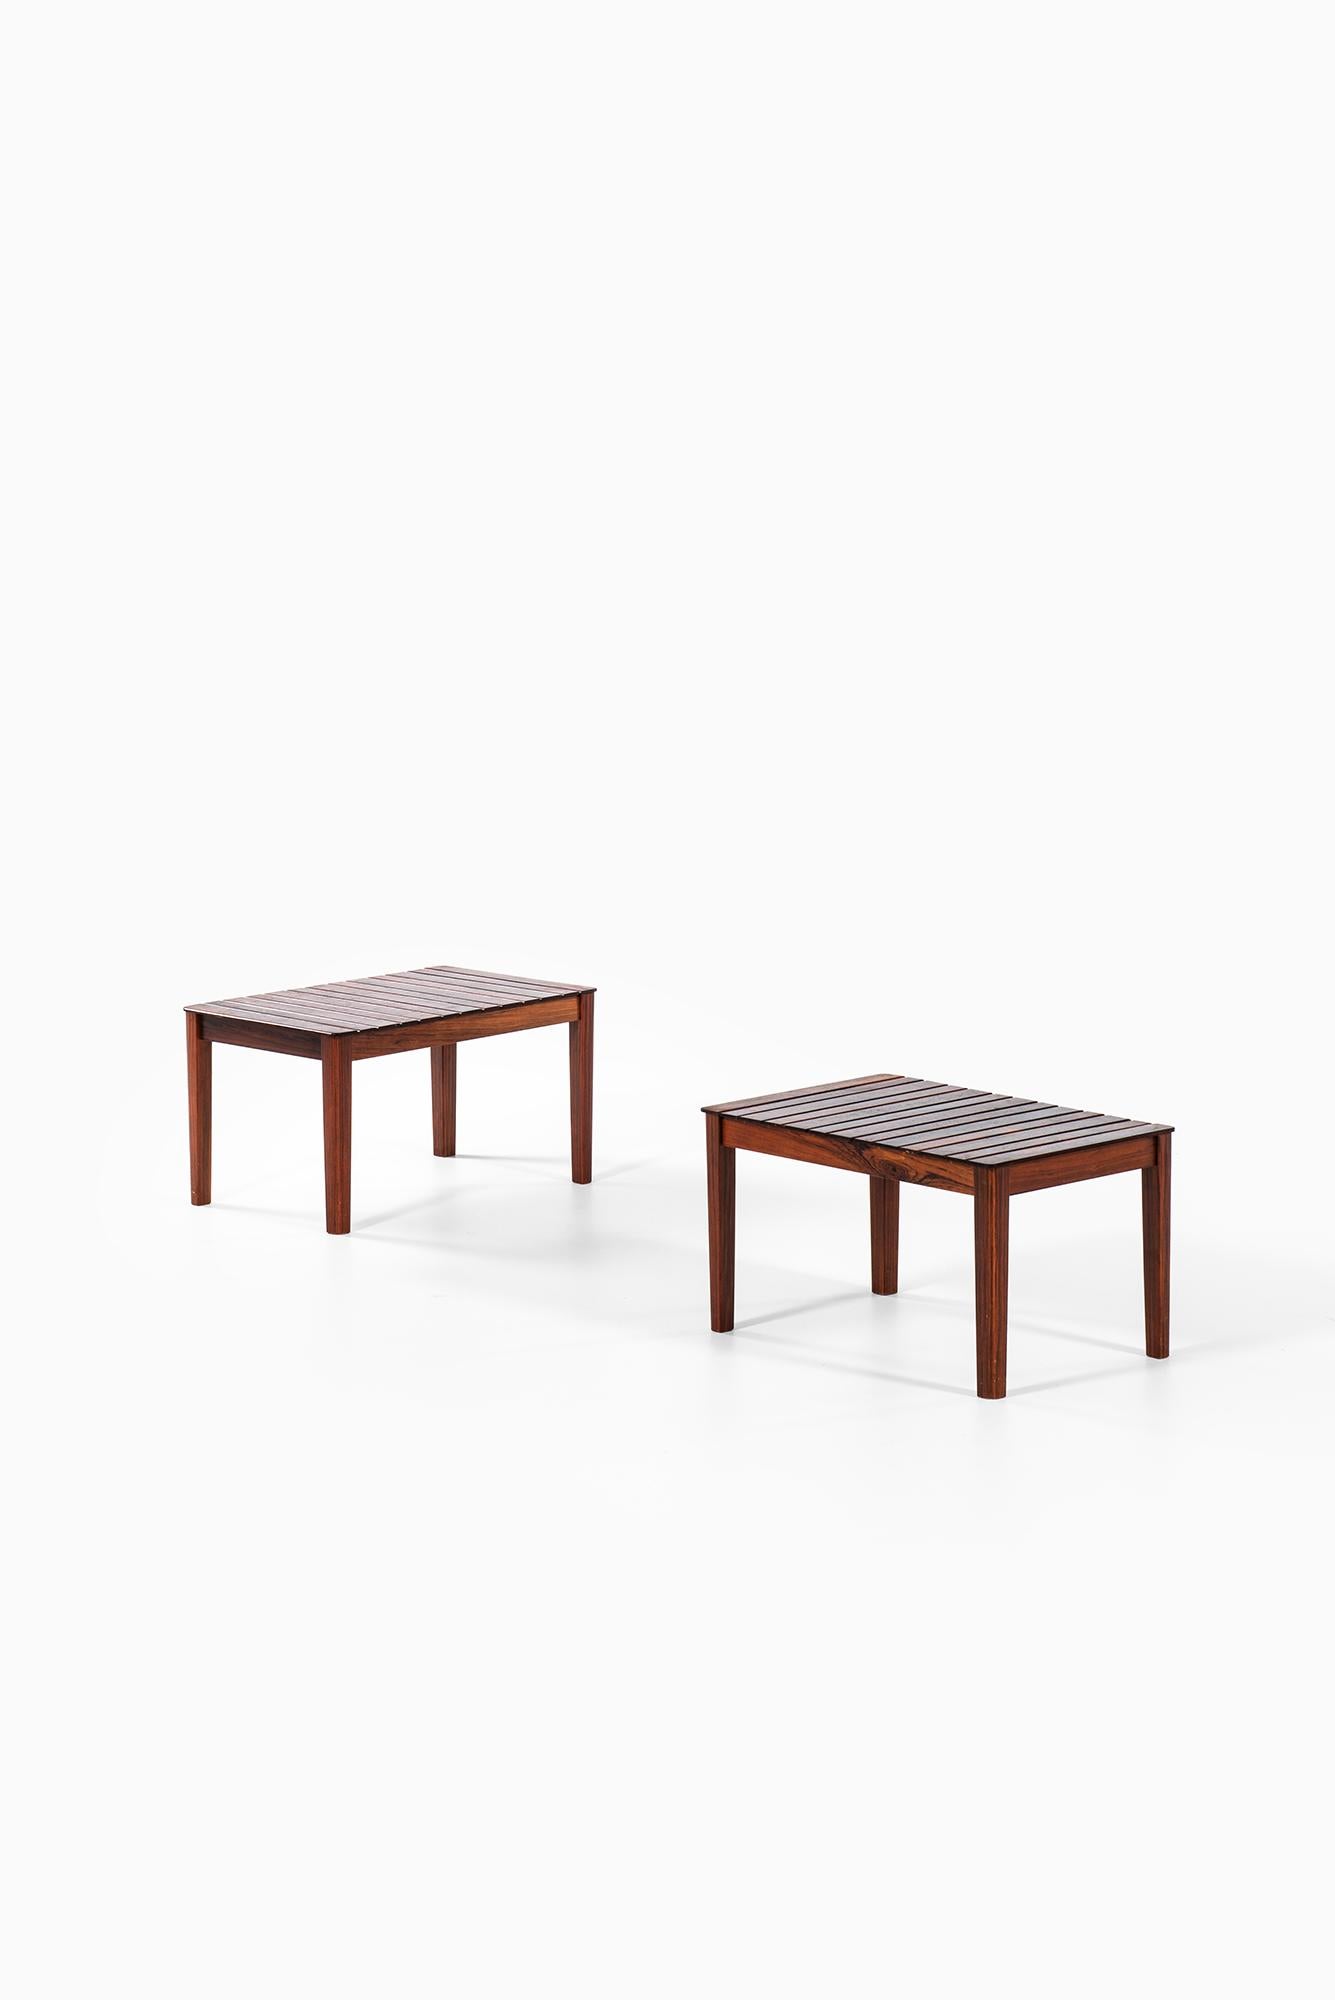 Mid-20th Century Pair of Side Tables or Benches in Solid Rosewood by Alberts in Sweden For Sale